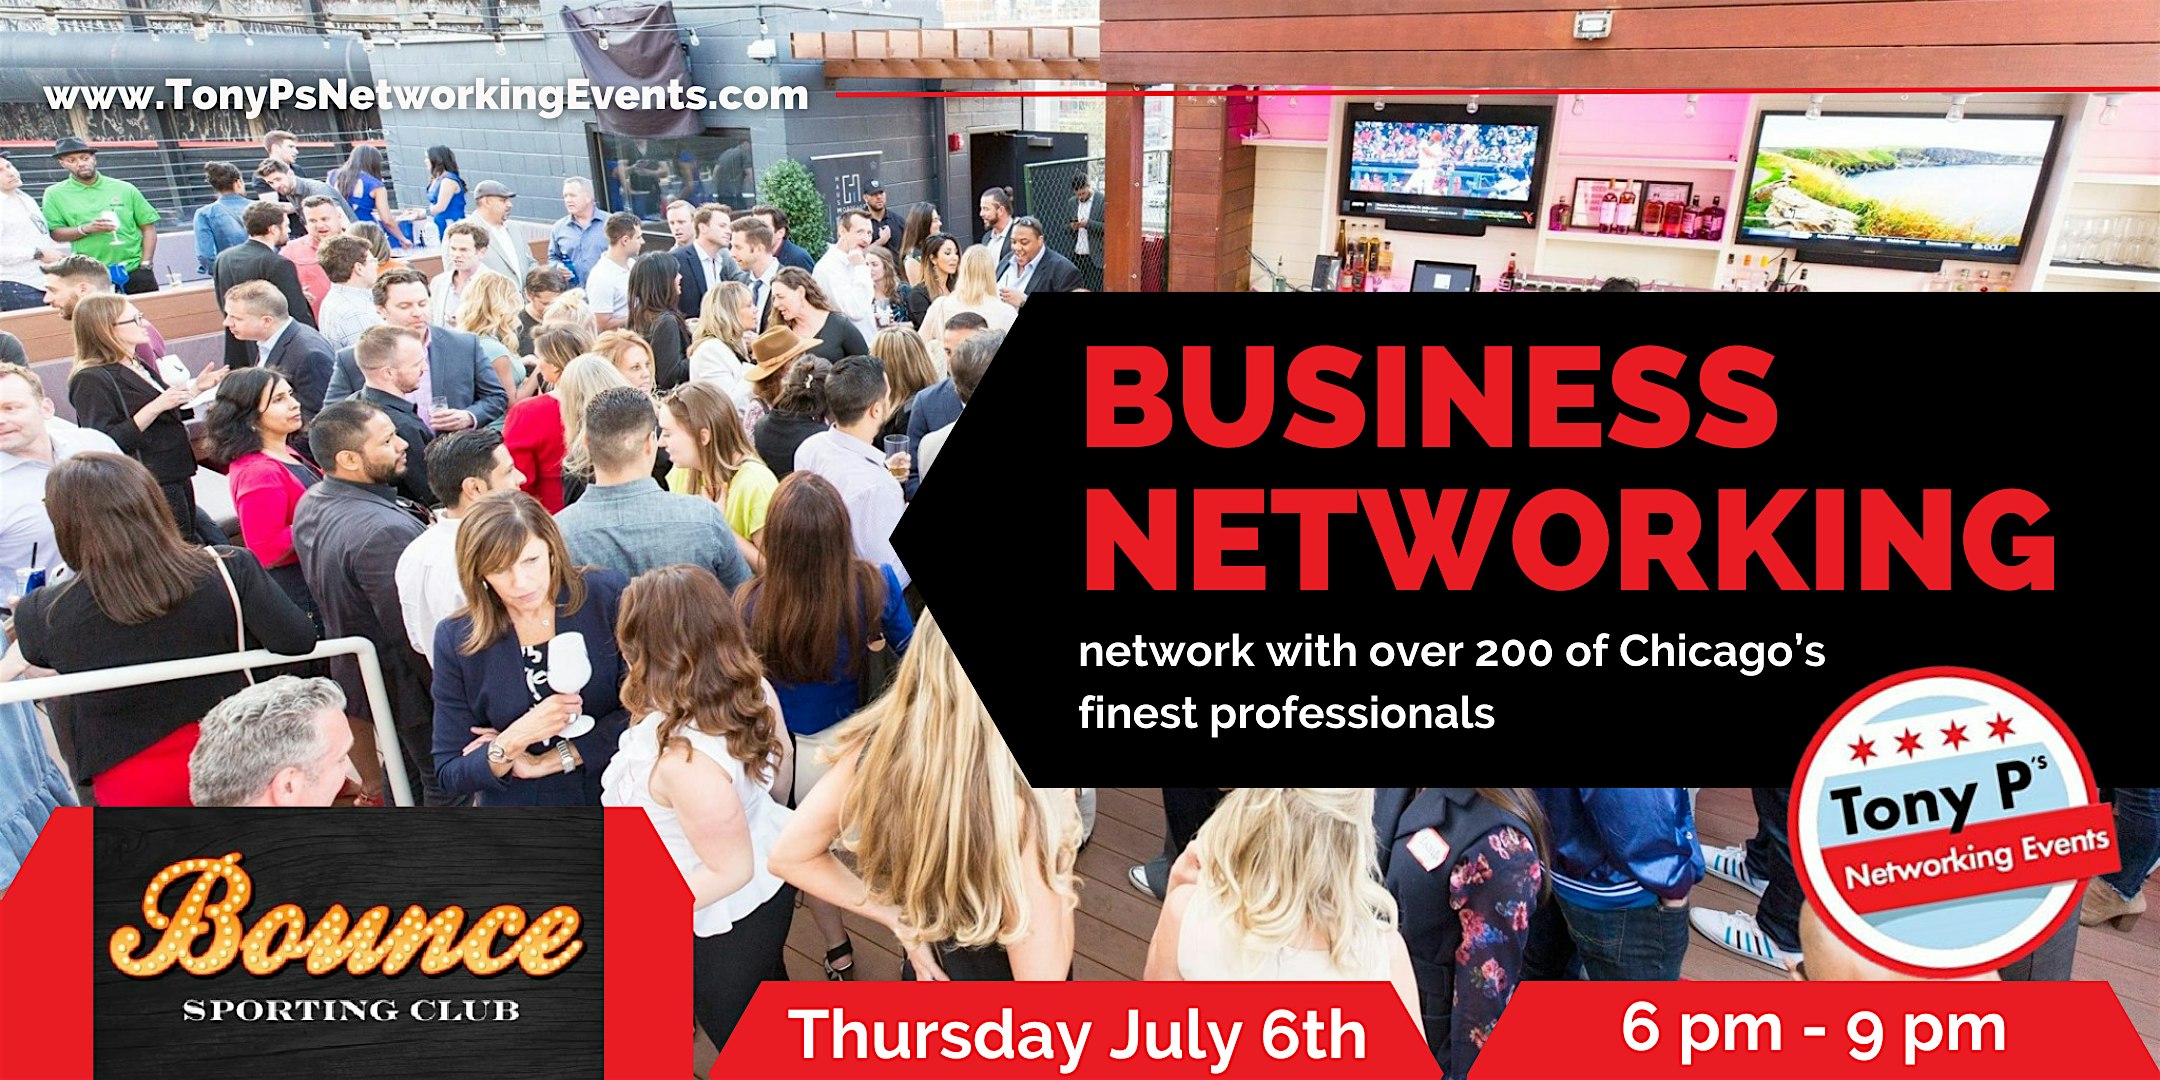 Tony P’s July Networking Event at Bounce Sporting Club’s Rooftop